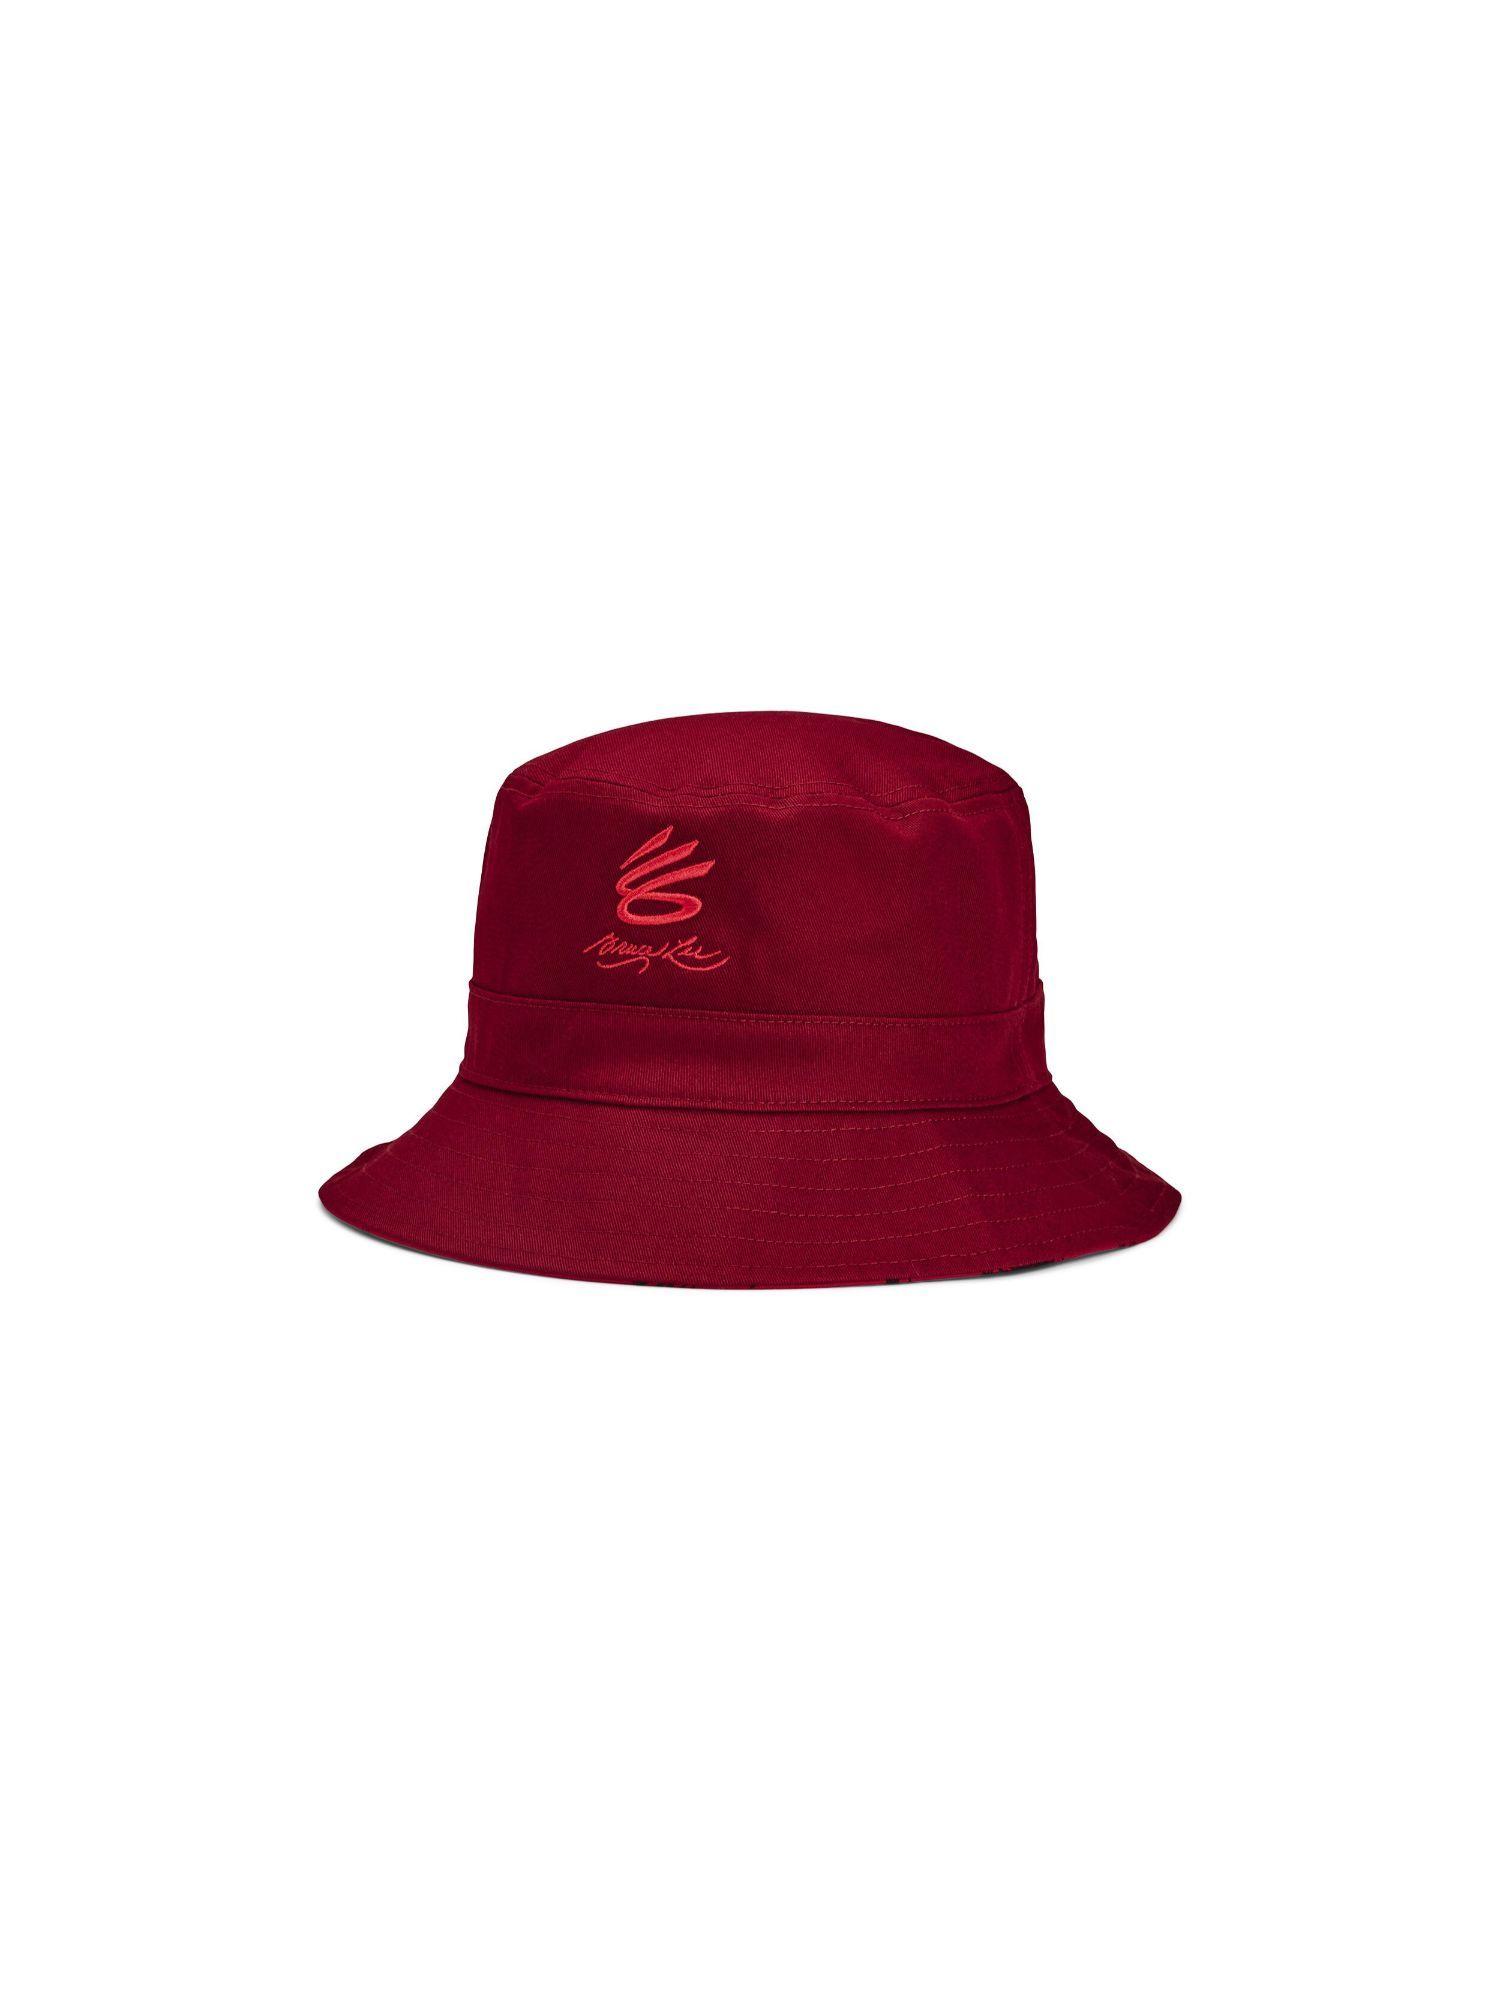 unisex-curry-x-bruce-lee-bucket-hat---red